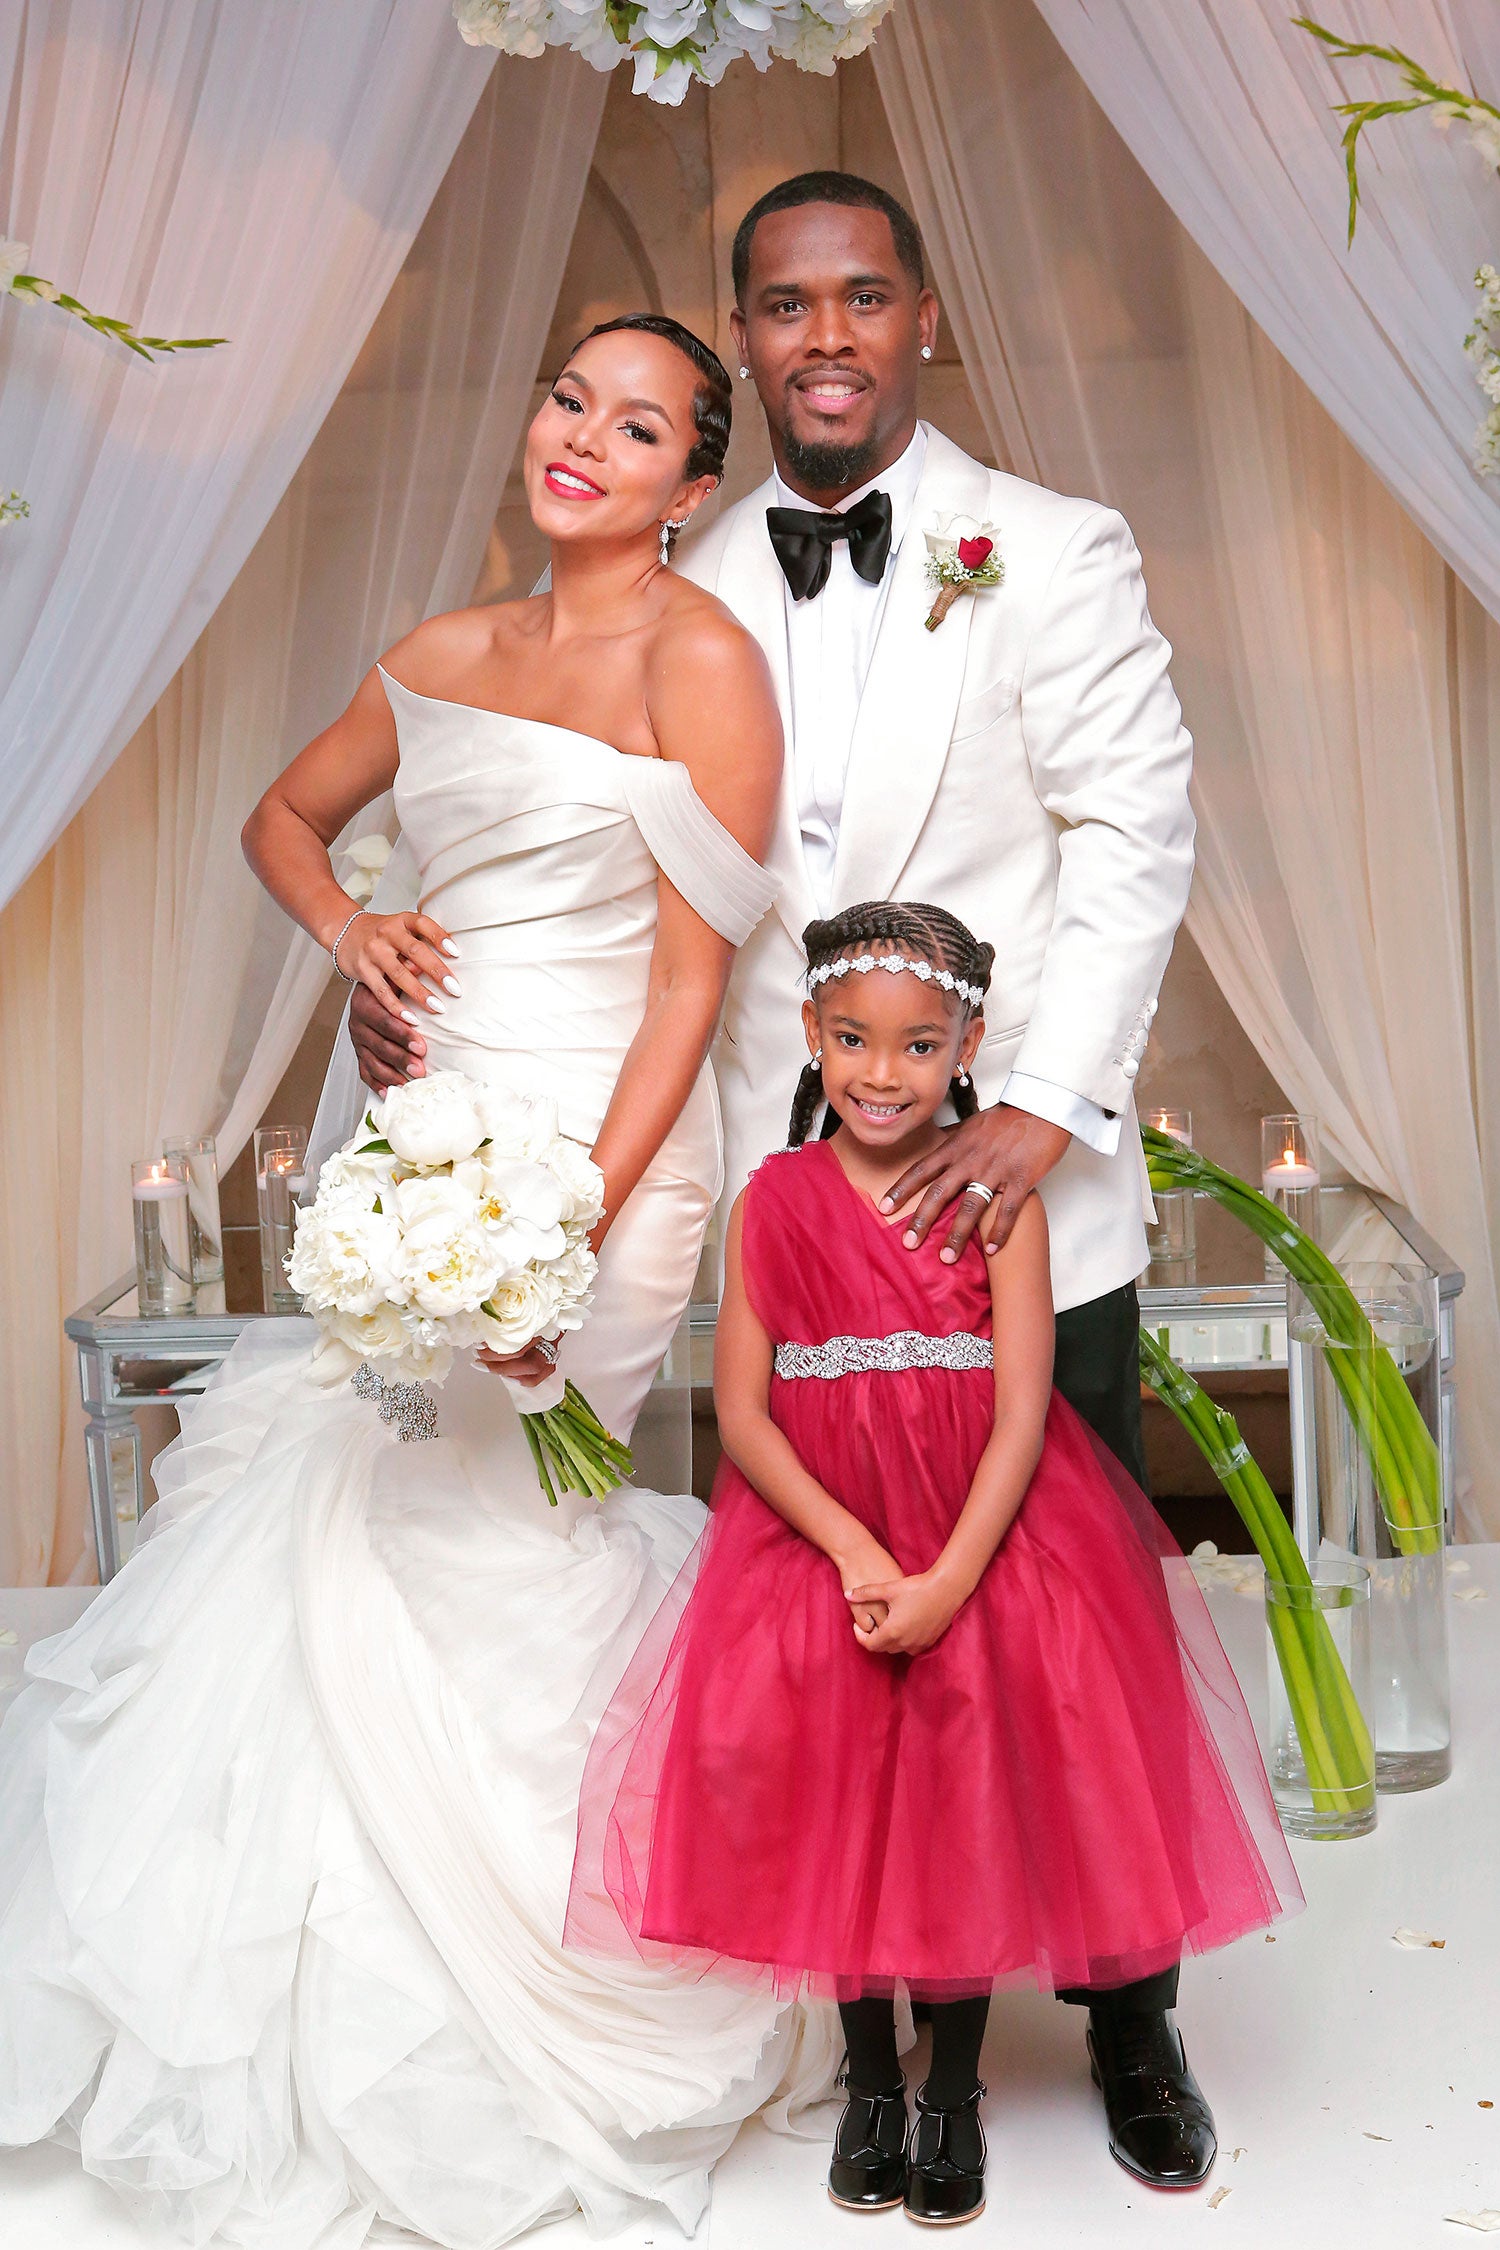 More Amazing Photos From LeToya Luckett's Wedding Day You Didn't See
